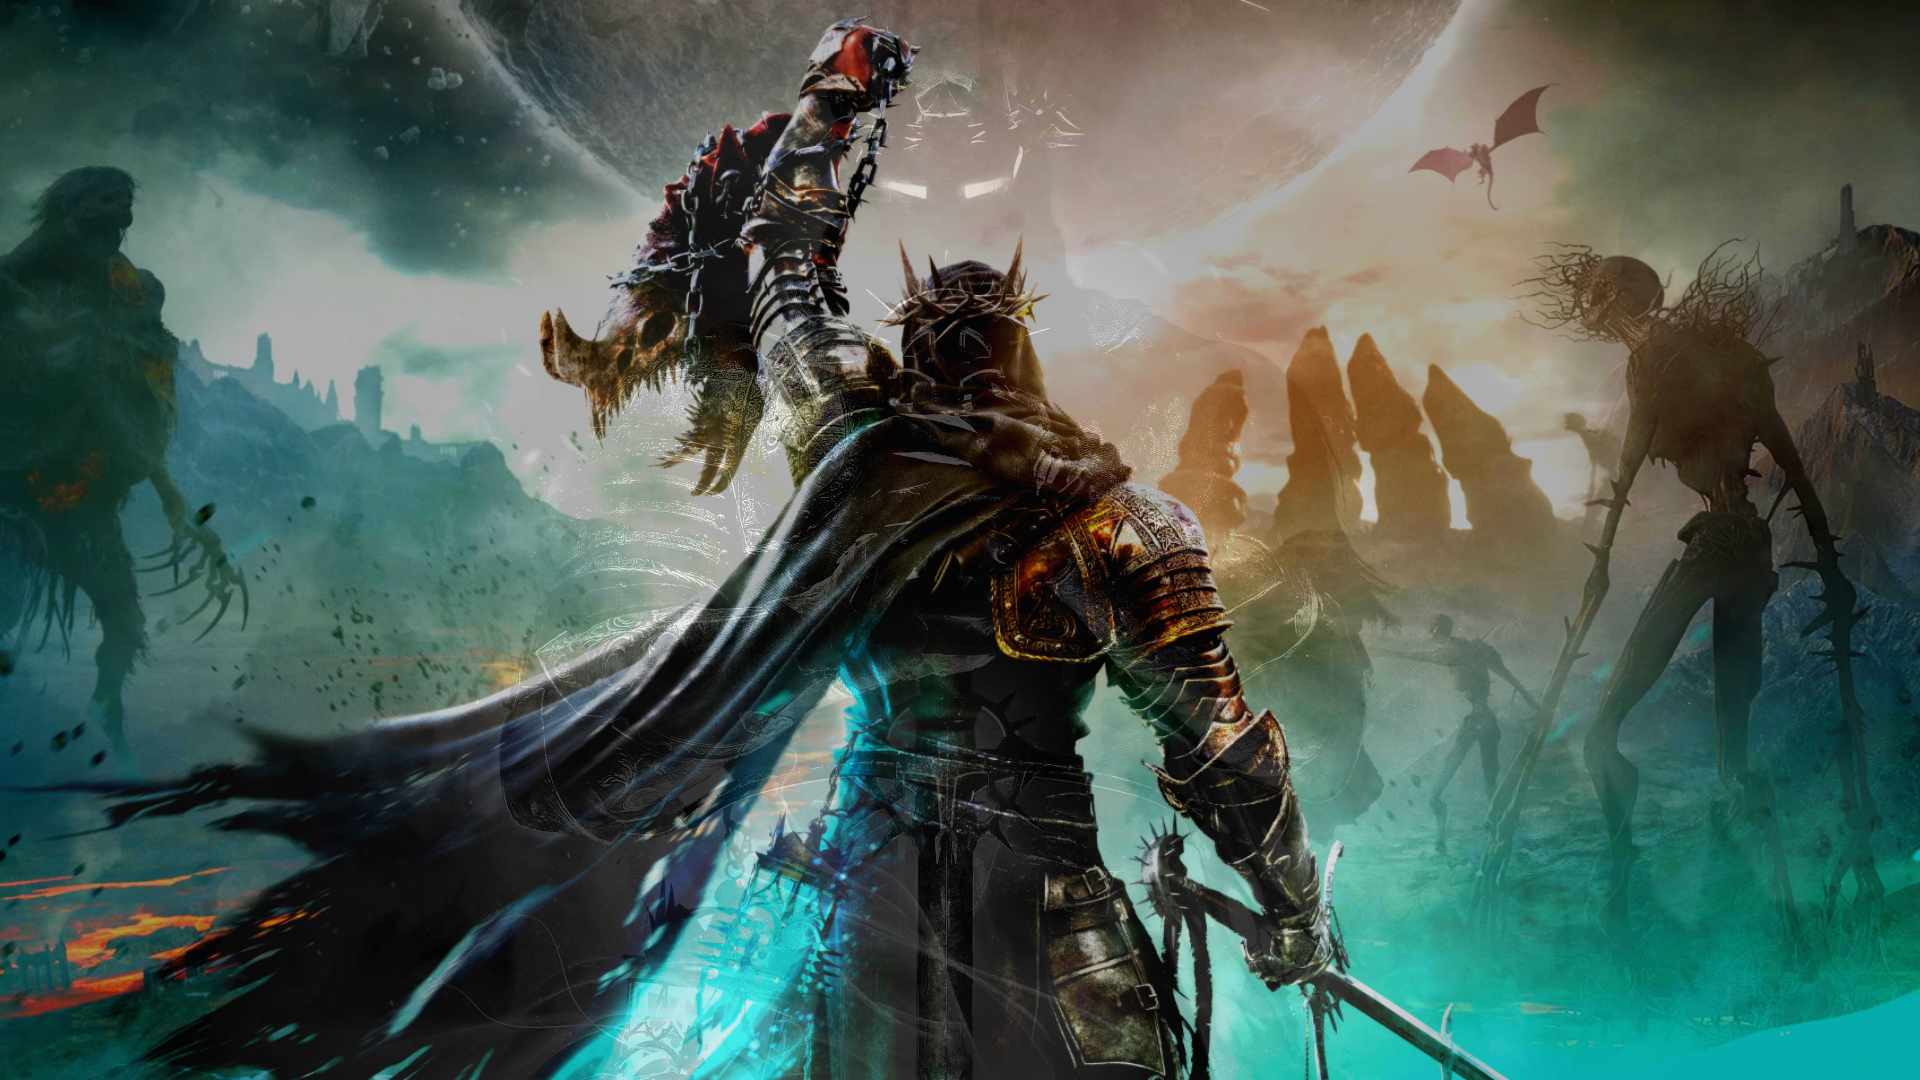 New Lords of the Fallen update stops walls crashing your game in